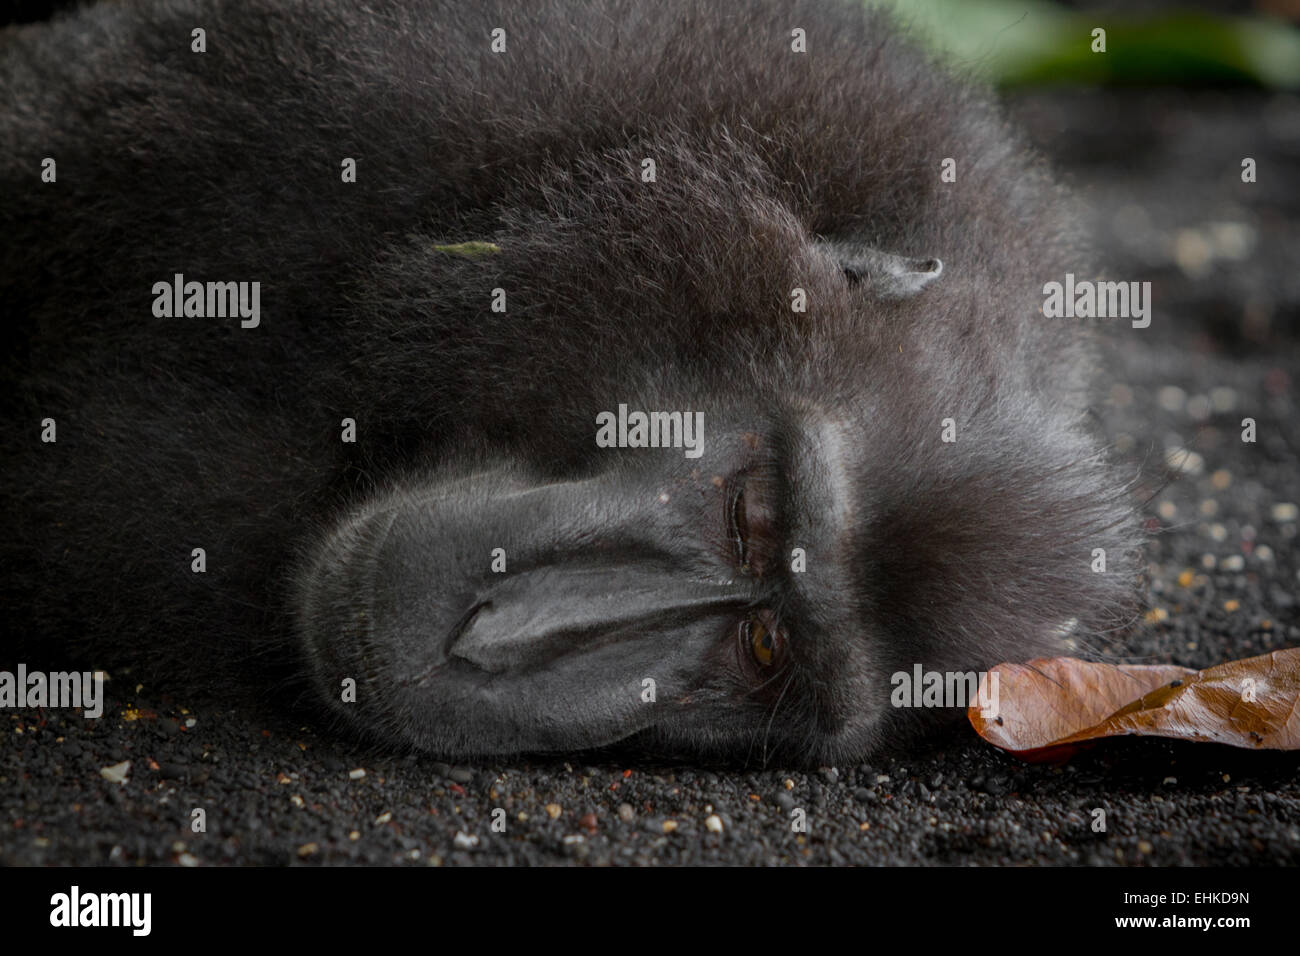 Sulawesi black-crested macaque (Macaca nigra) taking a nap on the beach of Tangkoko, North Sulawesi, Indonesia. Stock Photo